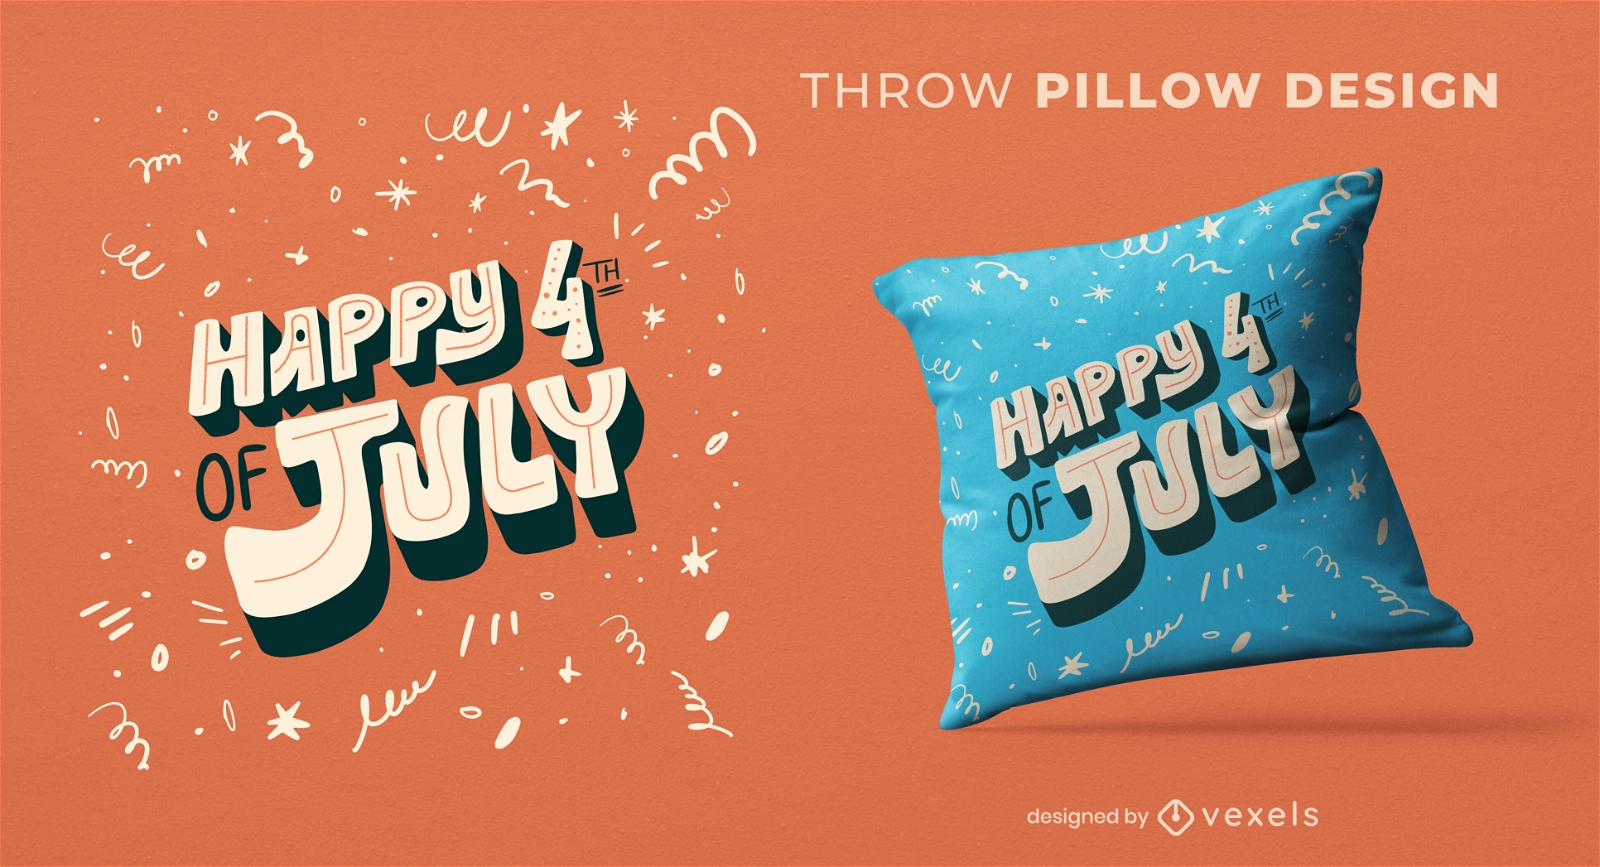 4th of july throw pillow design